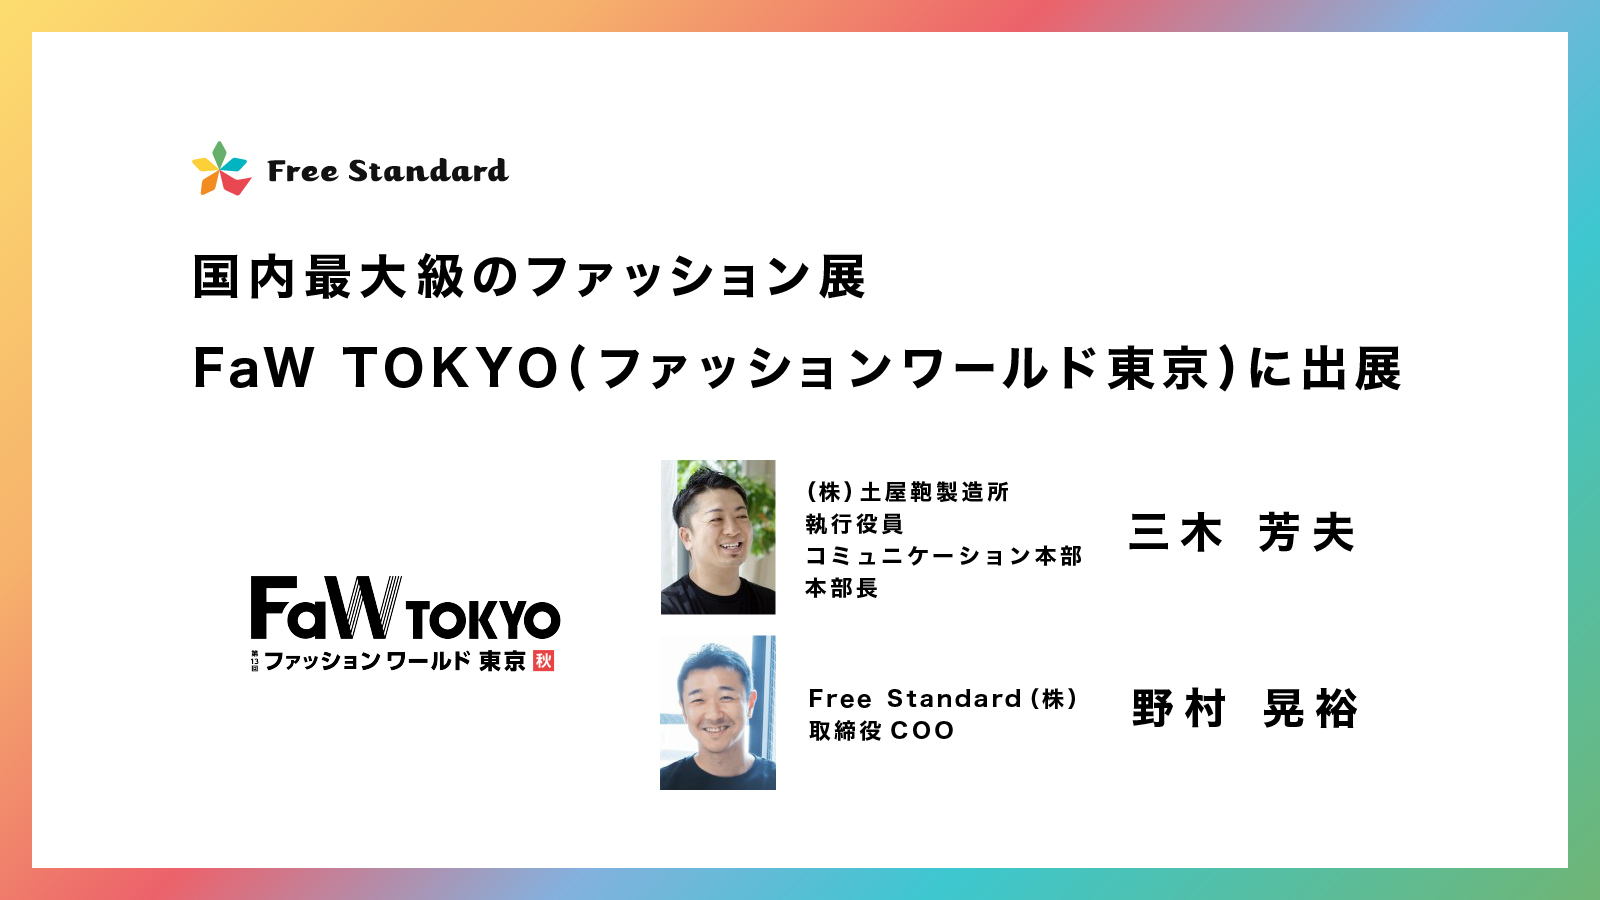 “Retailor”, which builds a brand-led EC reuse market, exhibits at Japan’s largest fashion exhibition “FaW TOKYO (Fashion World Tokyo)” | Press release of Free Standard Co., Ltd.